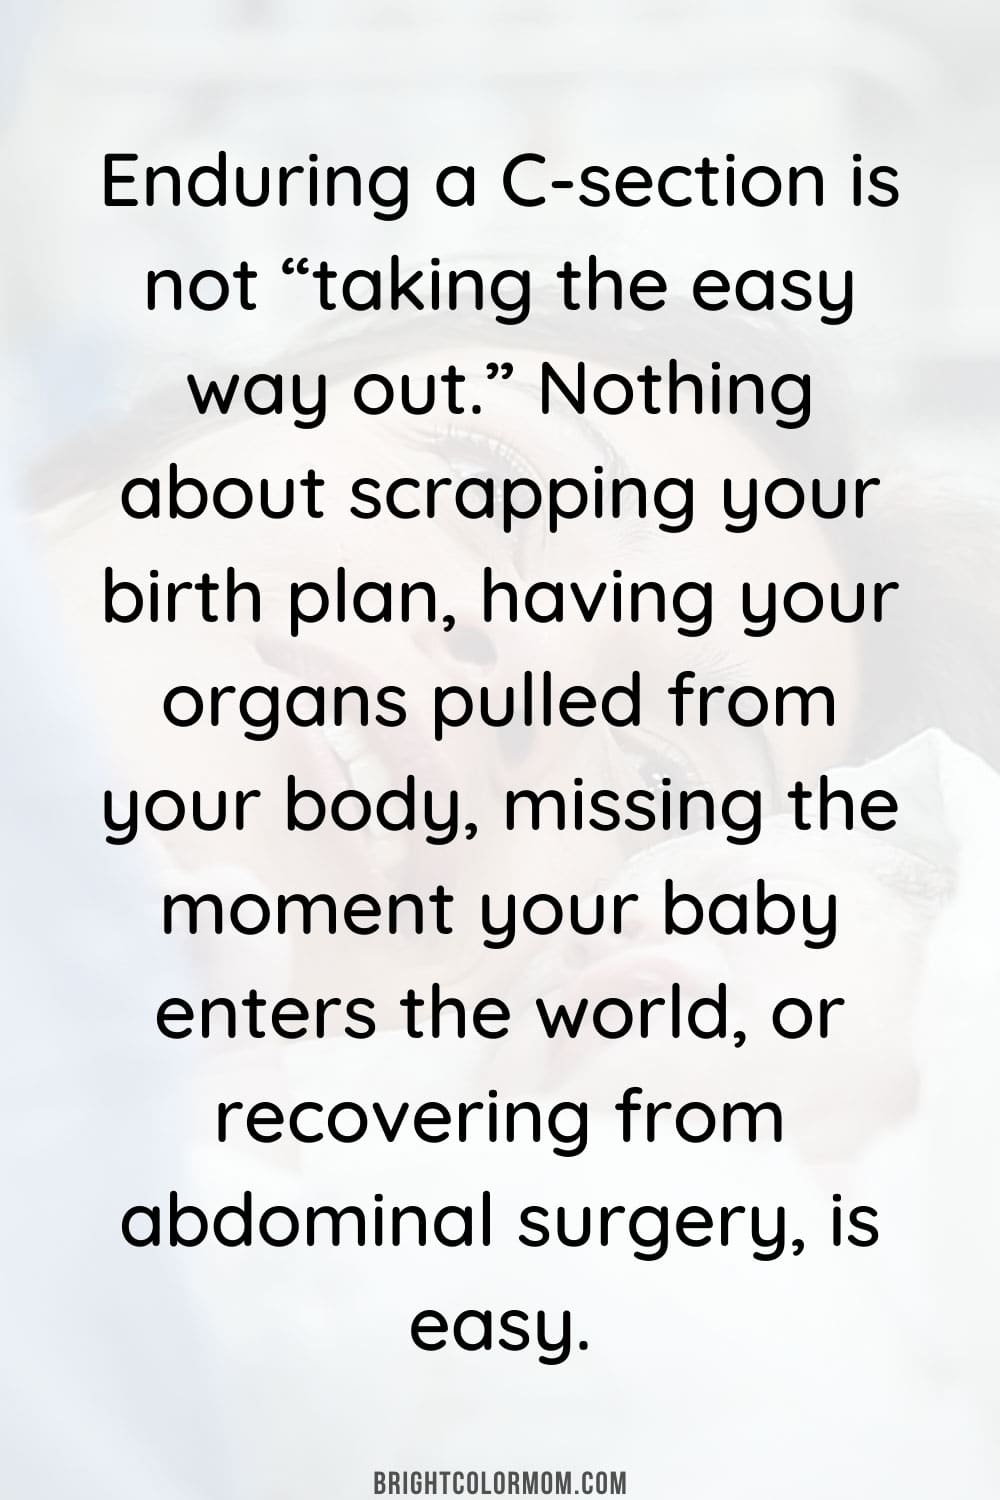 Enduring a C-section is not “taking the easy way out.” Nothing about scrapping your birth plan, having your organs pulled from your body, missing the moment your baby enters the world, or recovering from abdominal surgery, is easy.